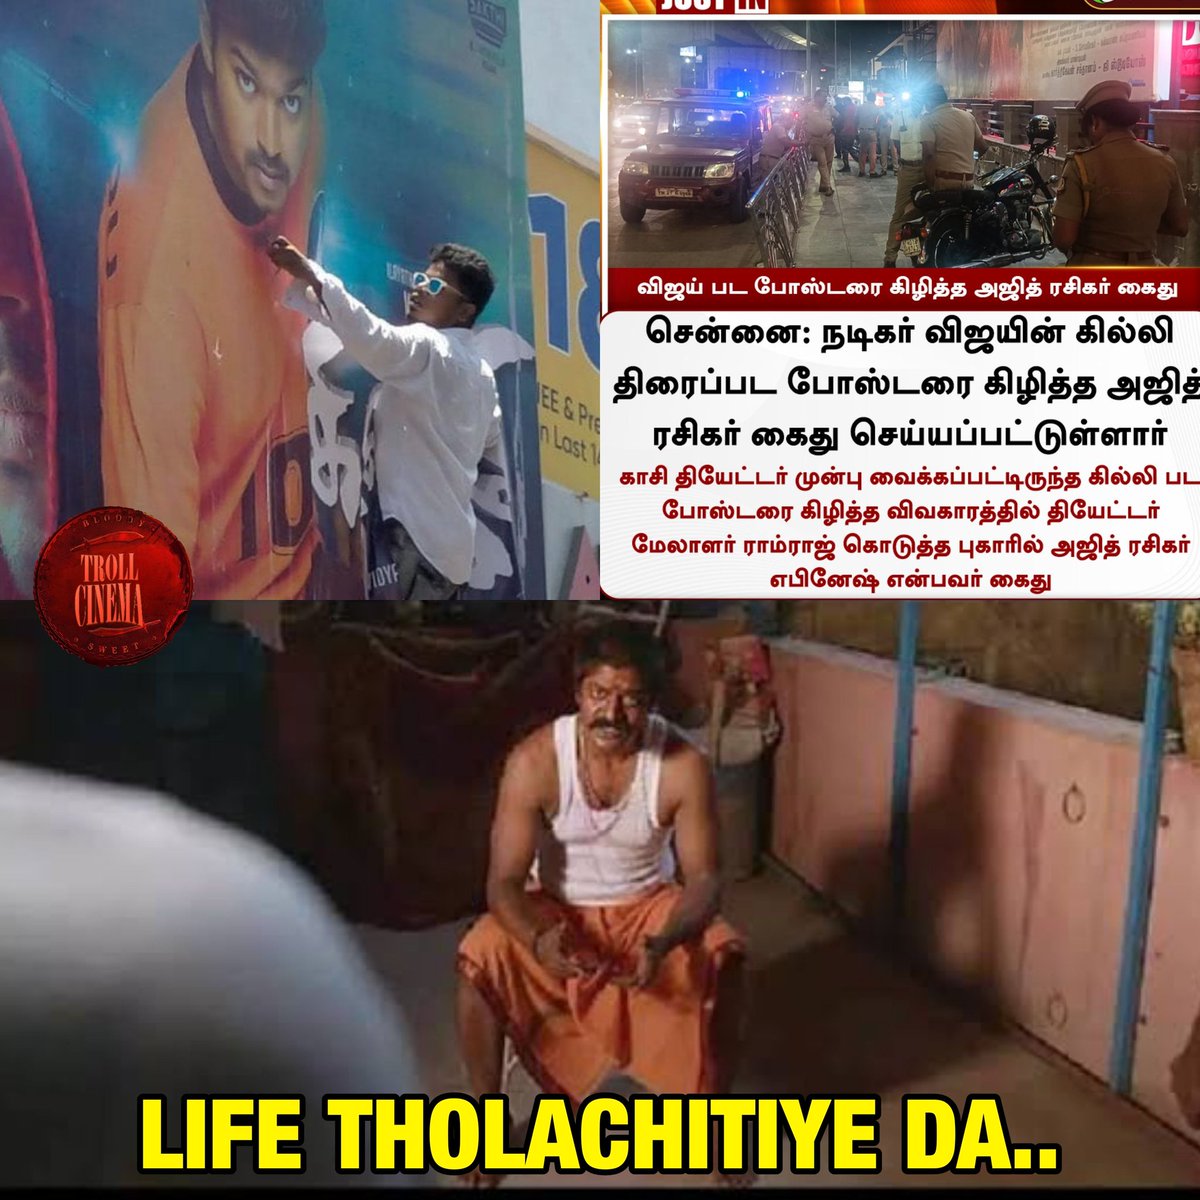 No matter whether it's #Vijay or #Ajith fans, don't get carried away by celebration in the theater. #Ghilli #Dheena